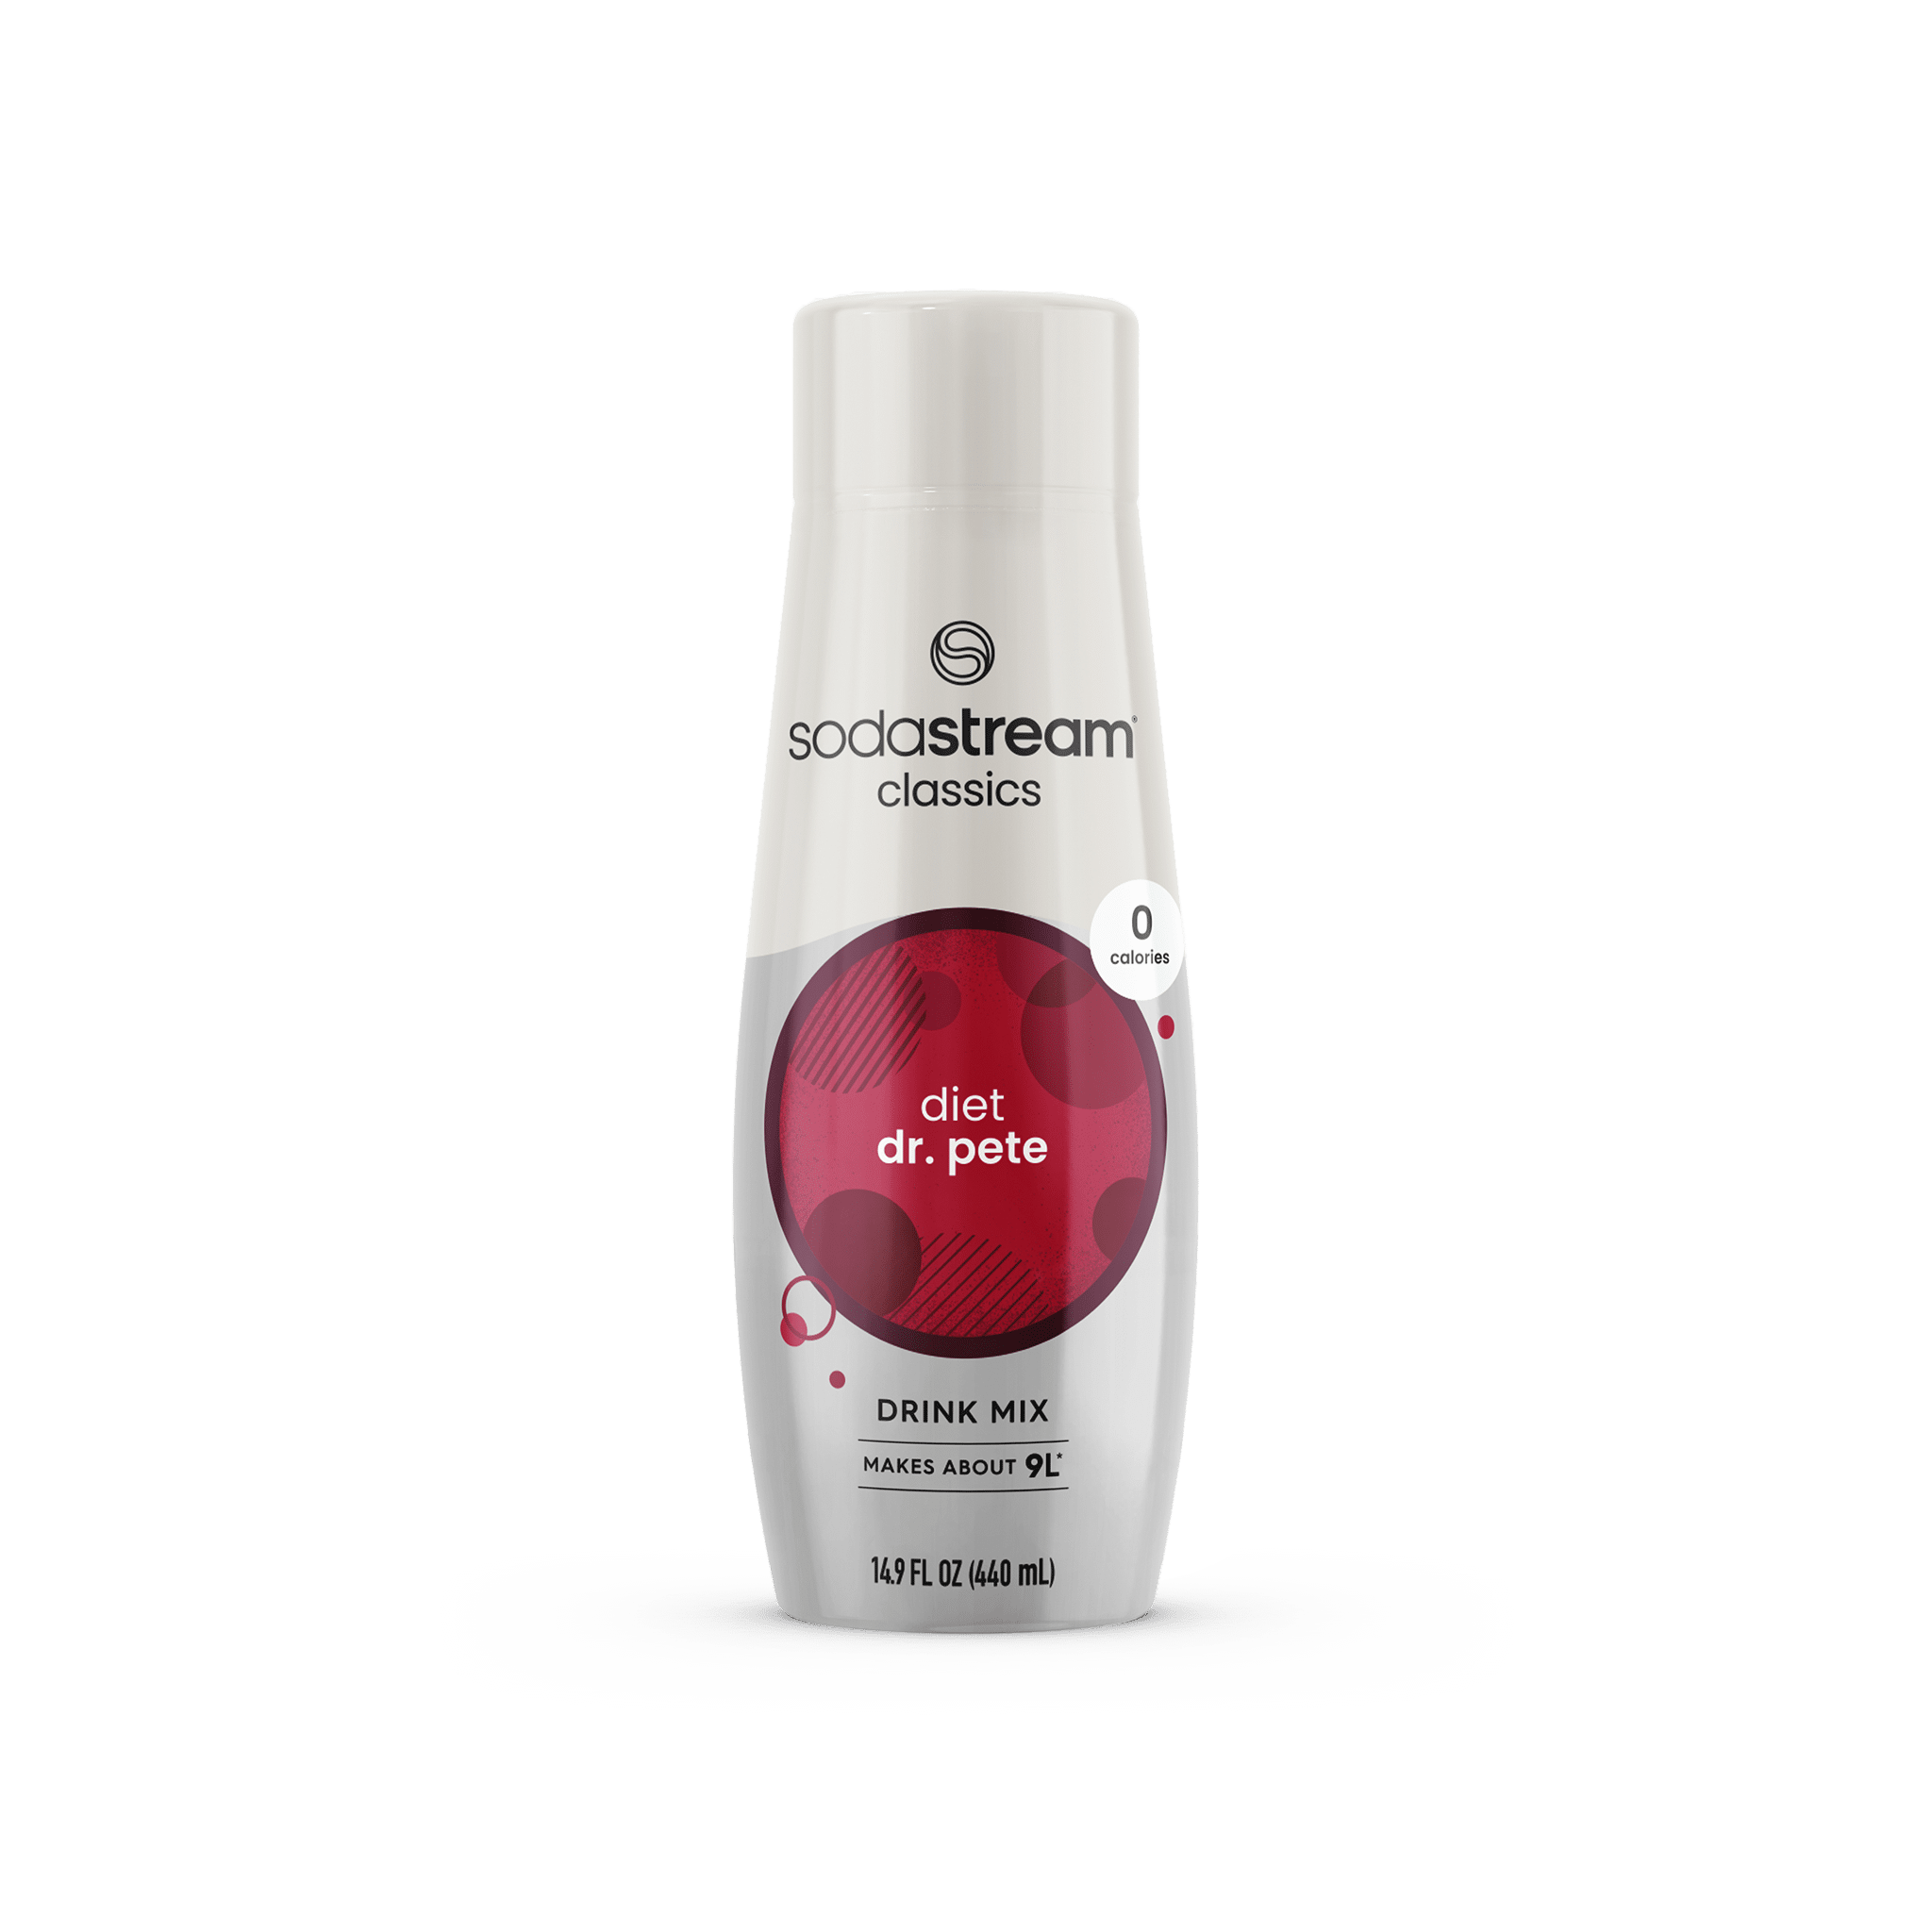 Diet Dr. Pete syrup sodastream drink mix